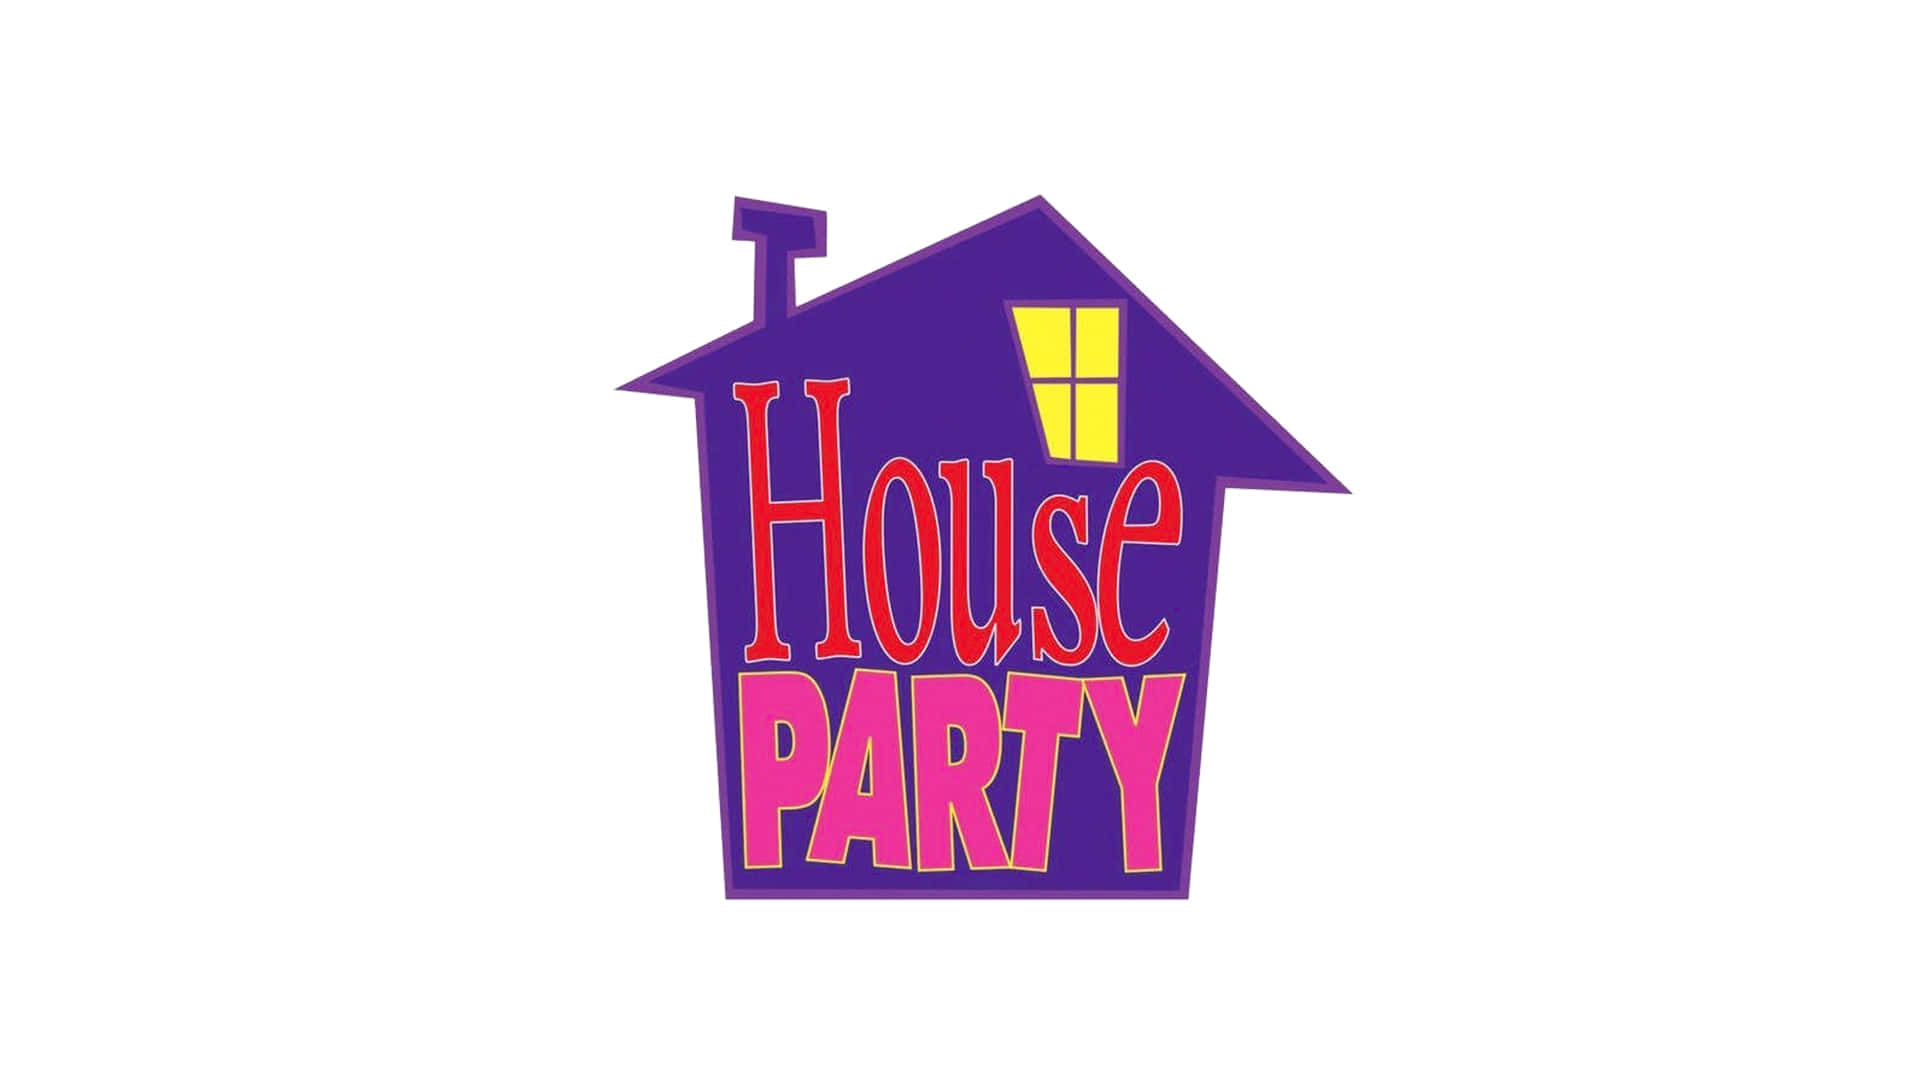 "Let the good times roll at your next house party!"